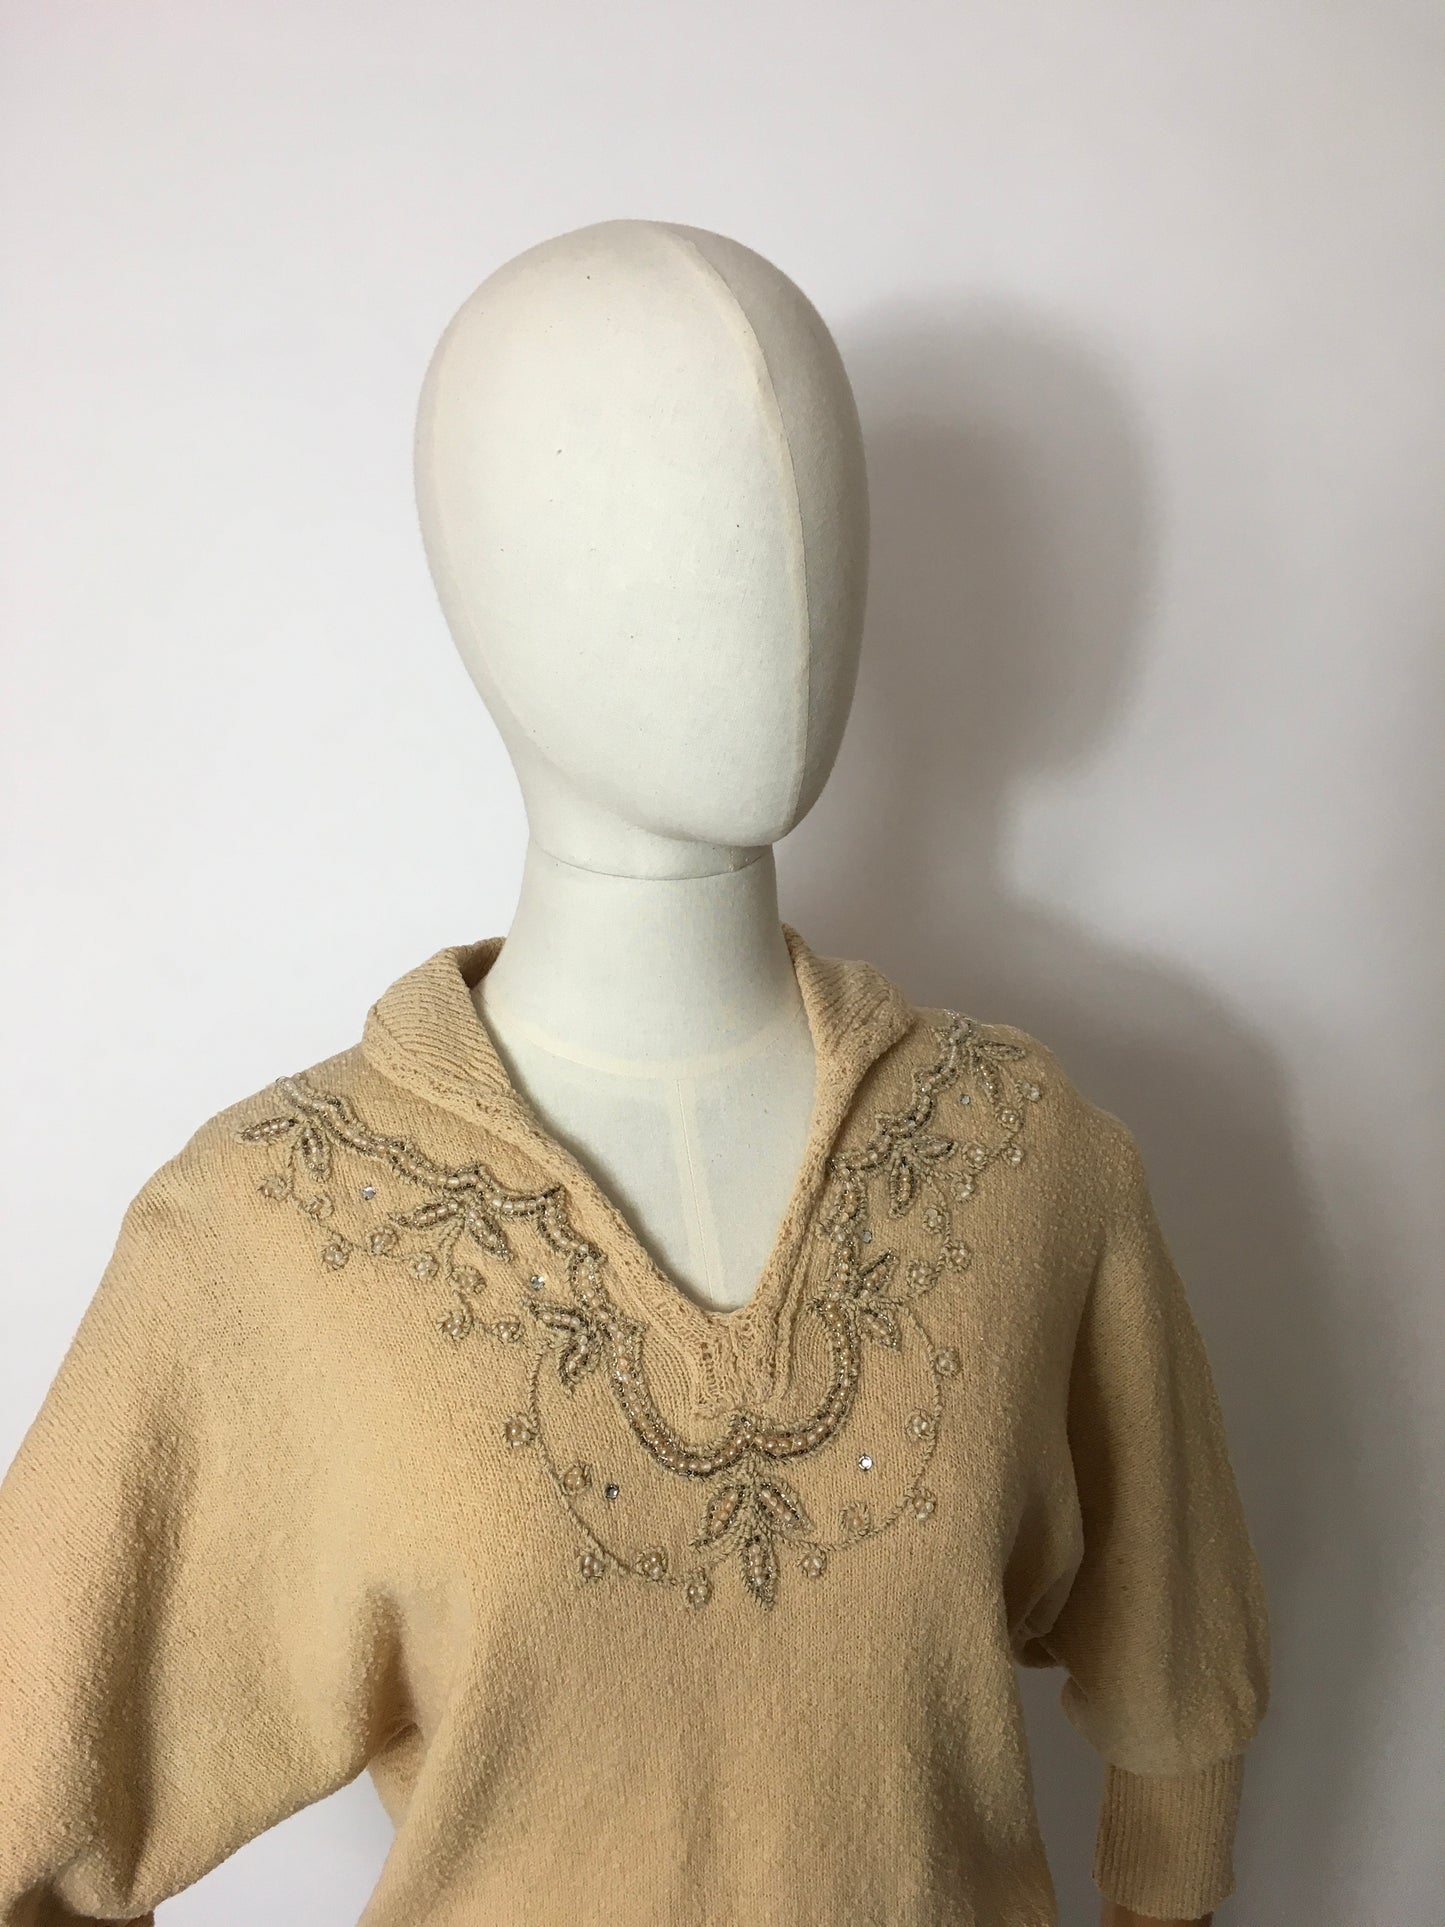 Original 1940’s Knitted Jumper - Adorned with Beautiful Beadwork & Has Dolman Sleeves